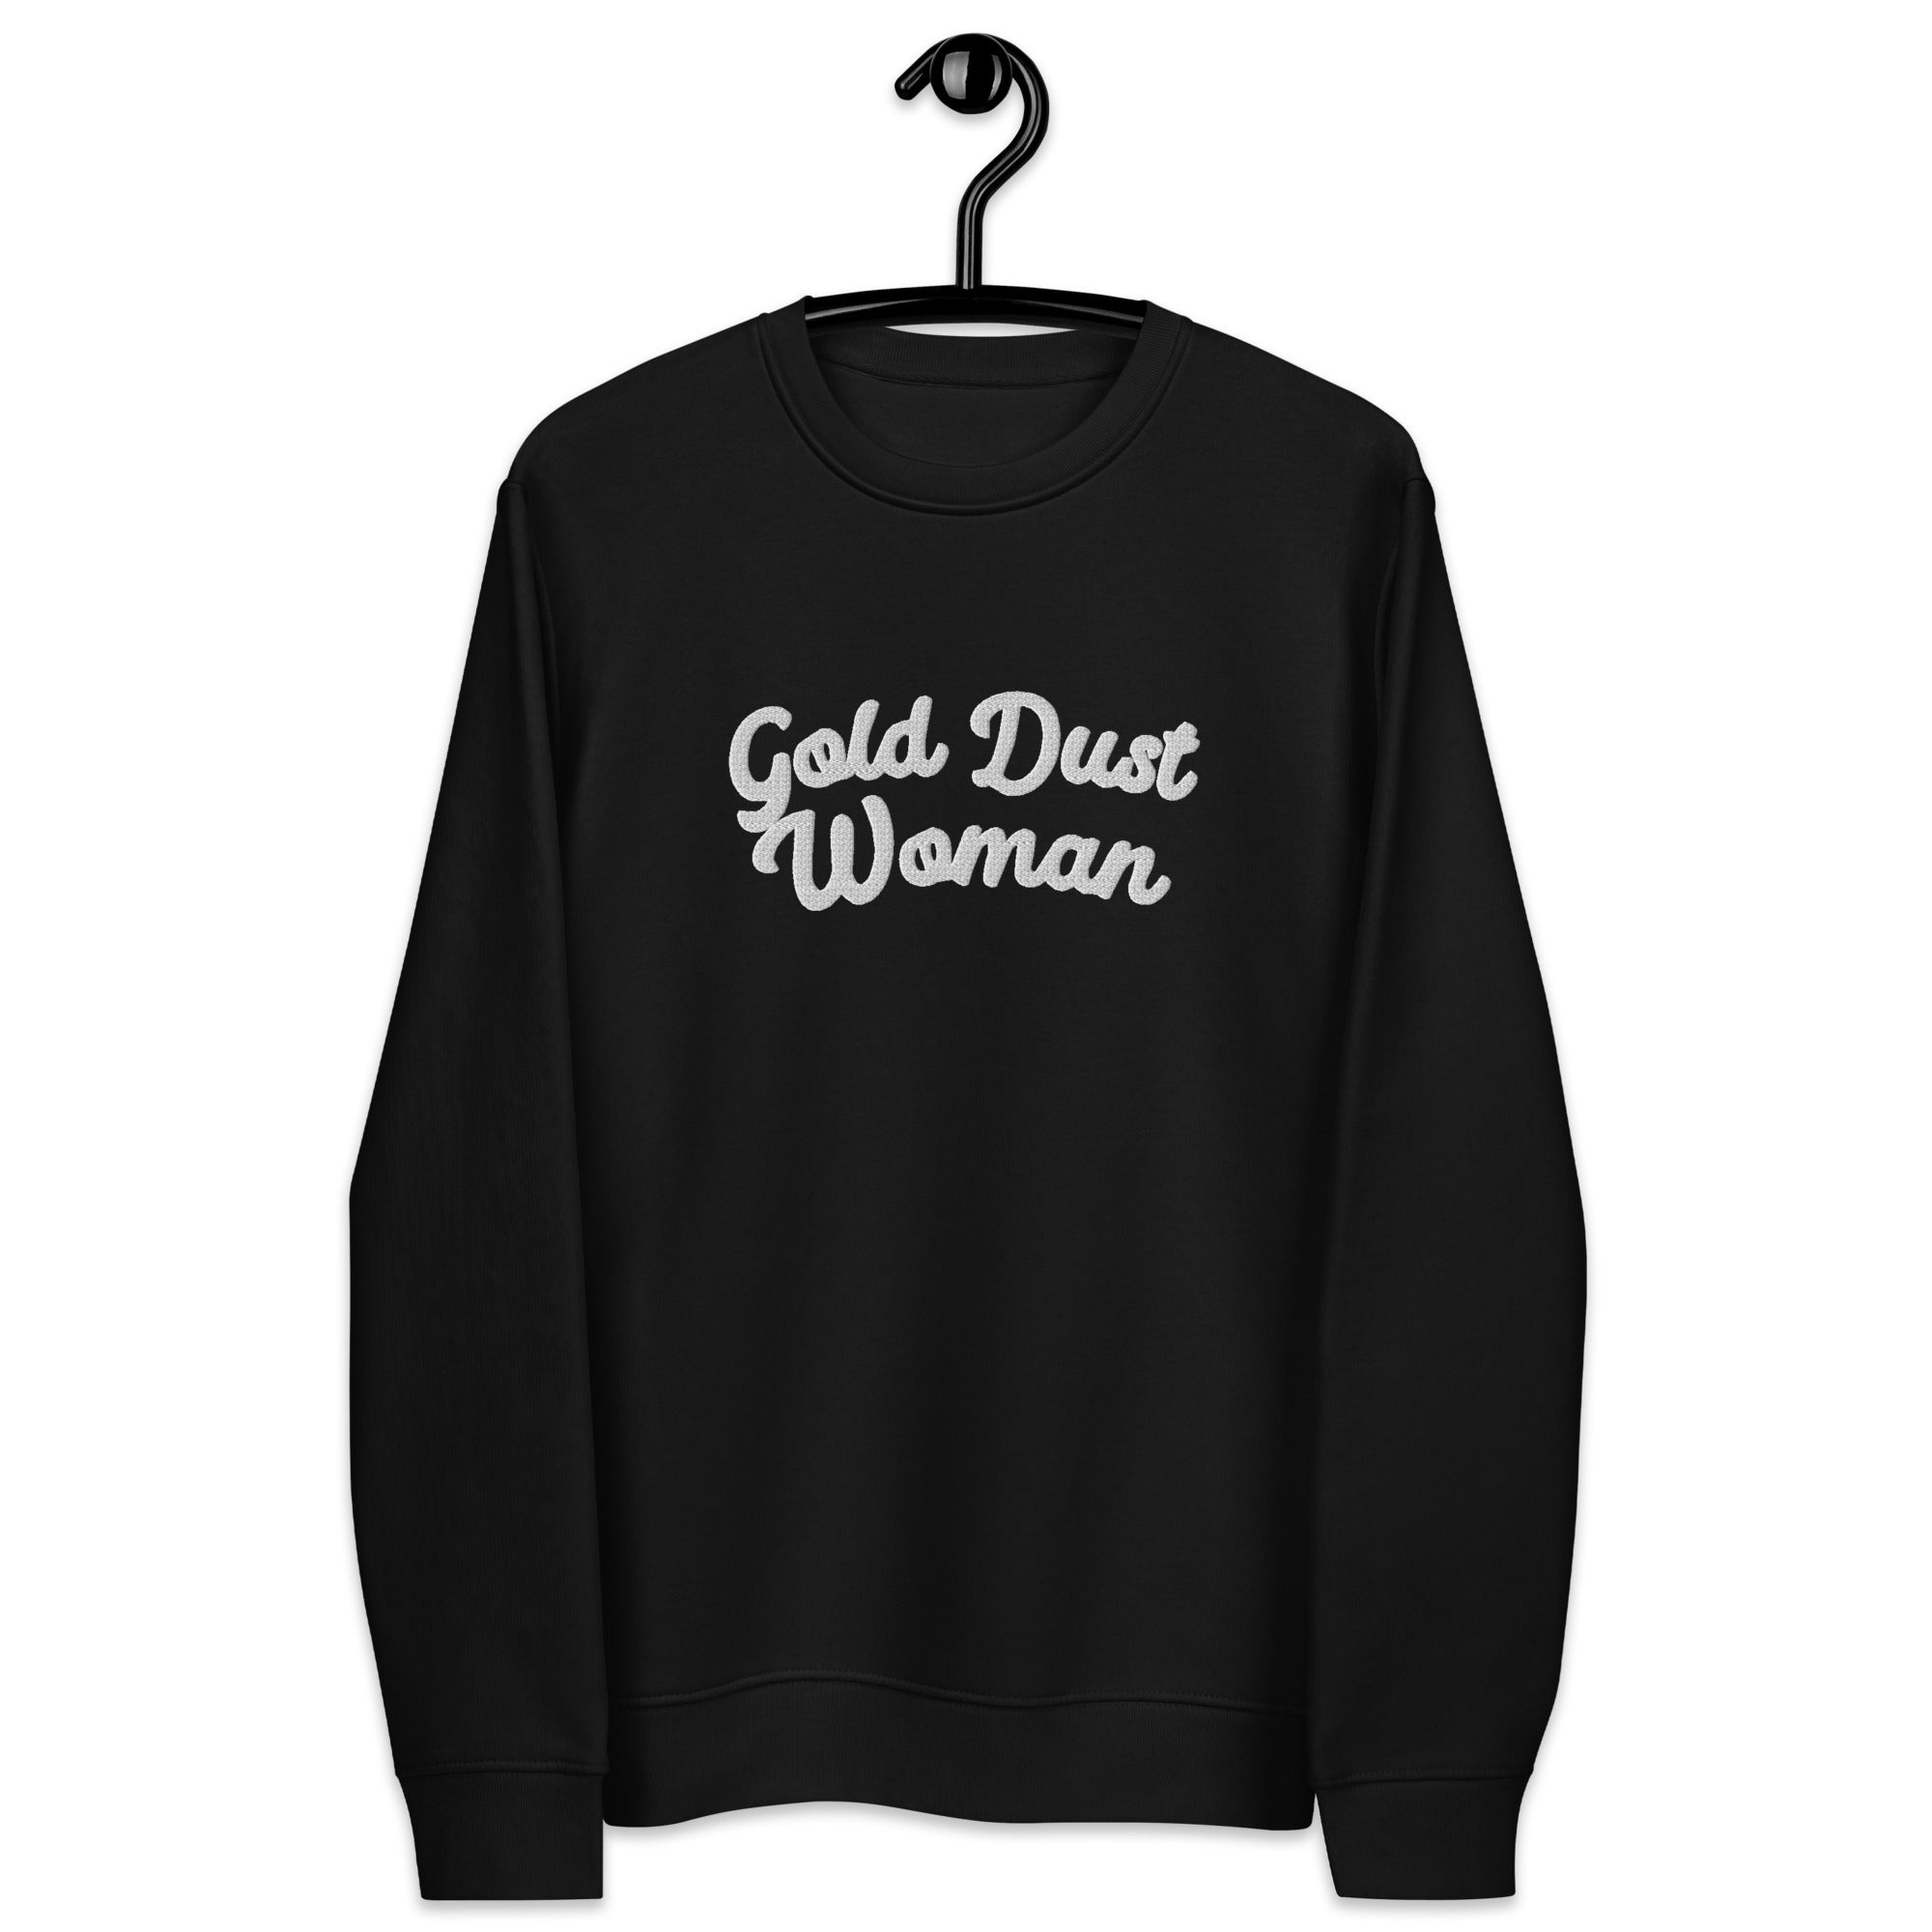 GOLD DUST WOMAN Embroidered Unisex Organic Sweatshirt - White Embroidery